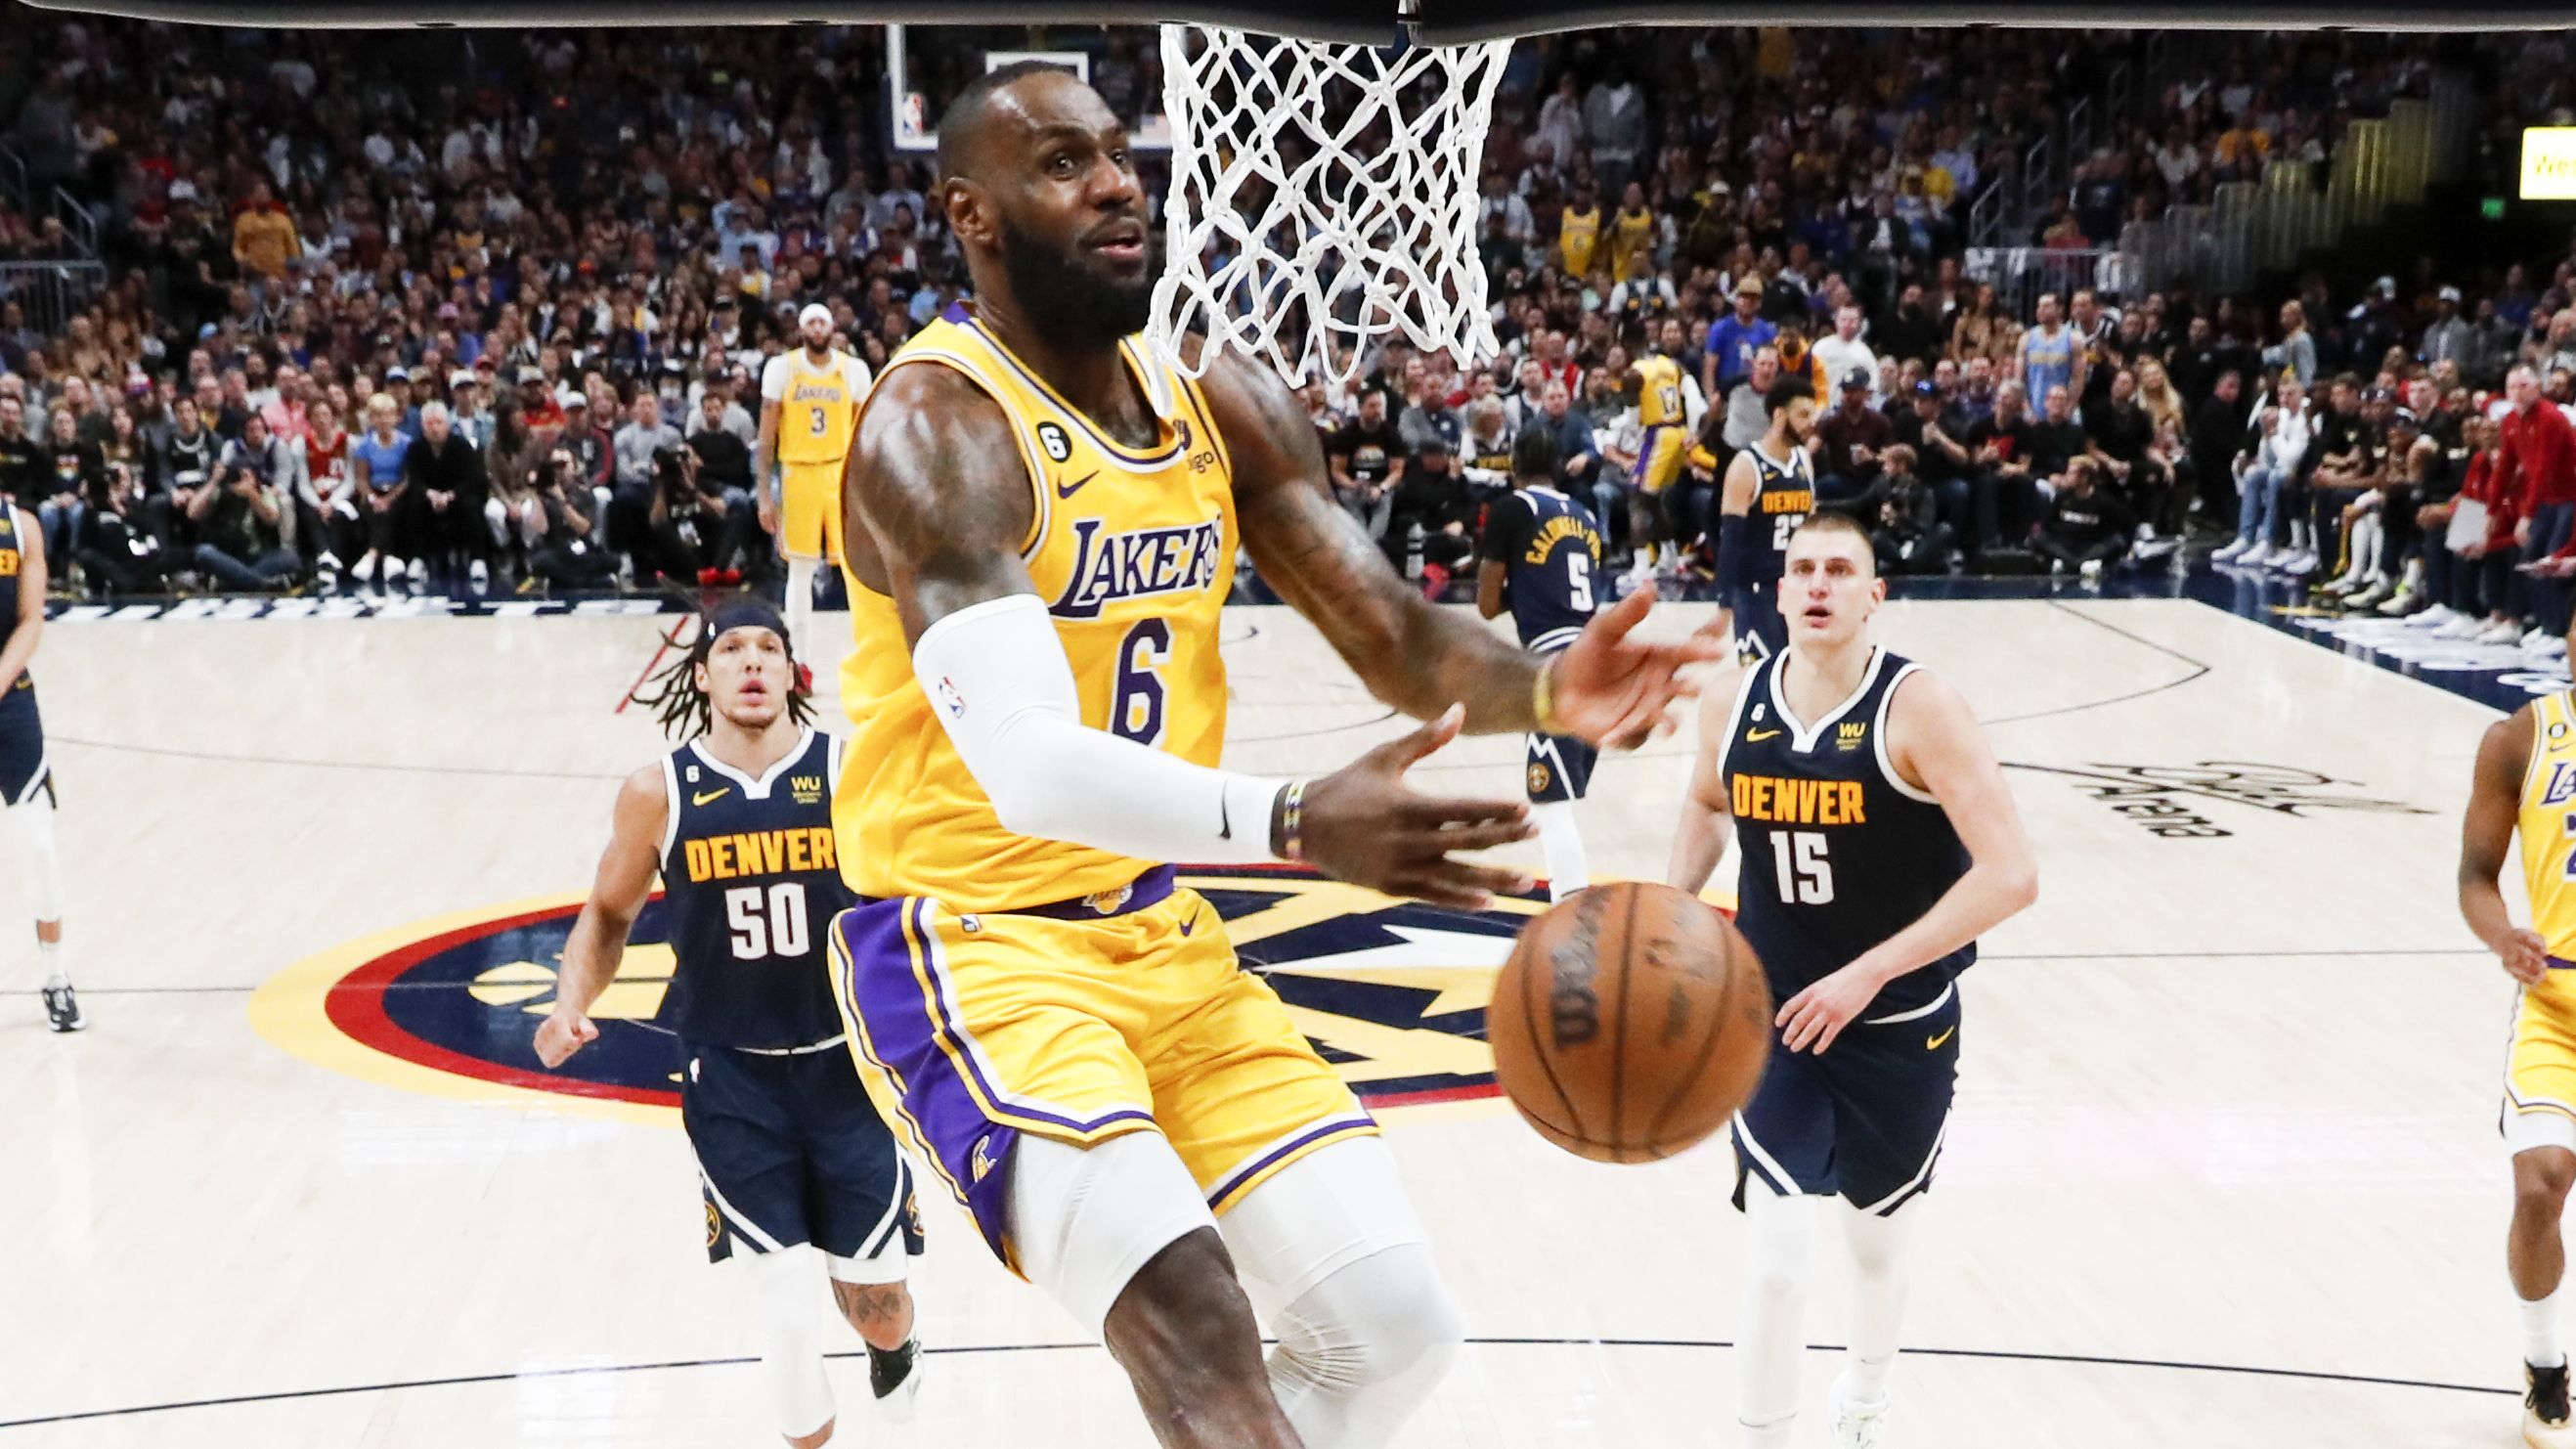 'I can't ever remember seeing that': Commentator stunned as LeBron's awful miss costs Lakers